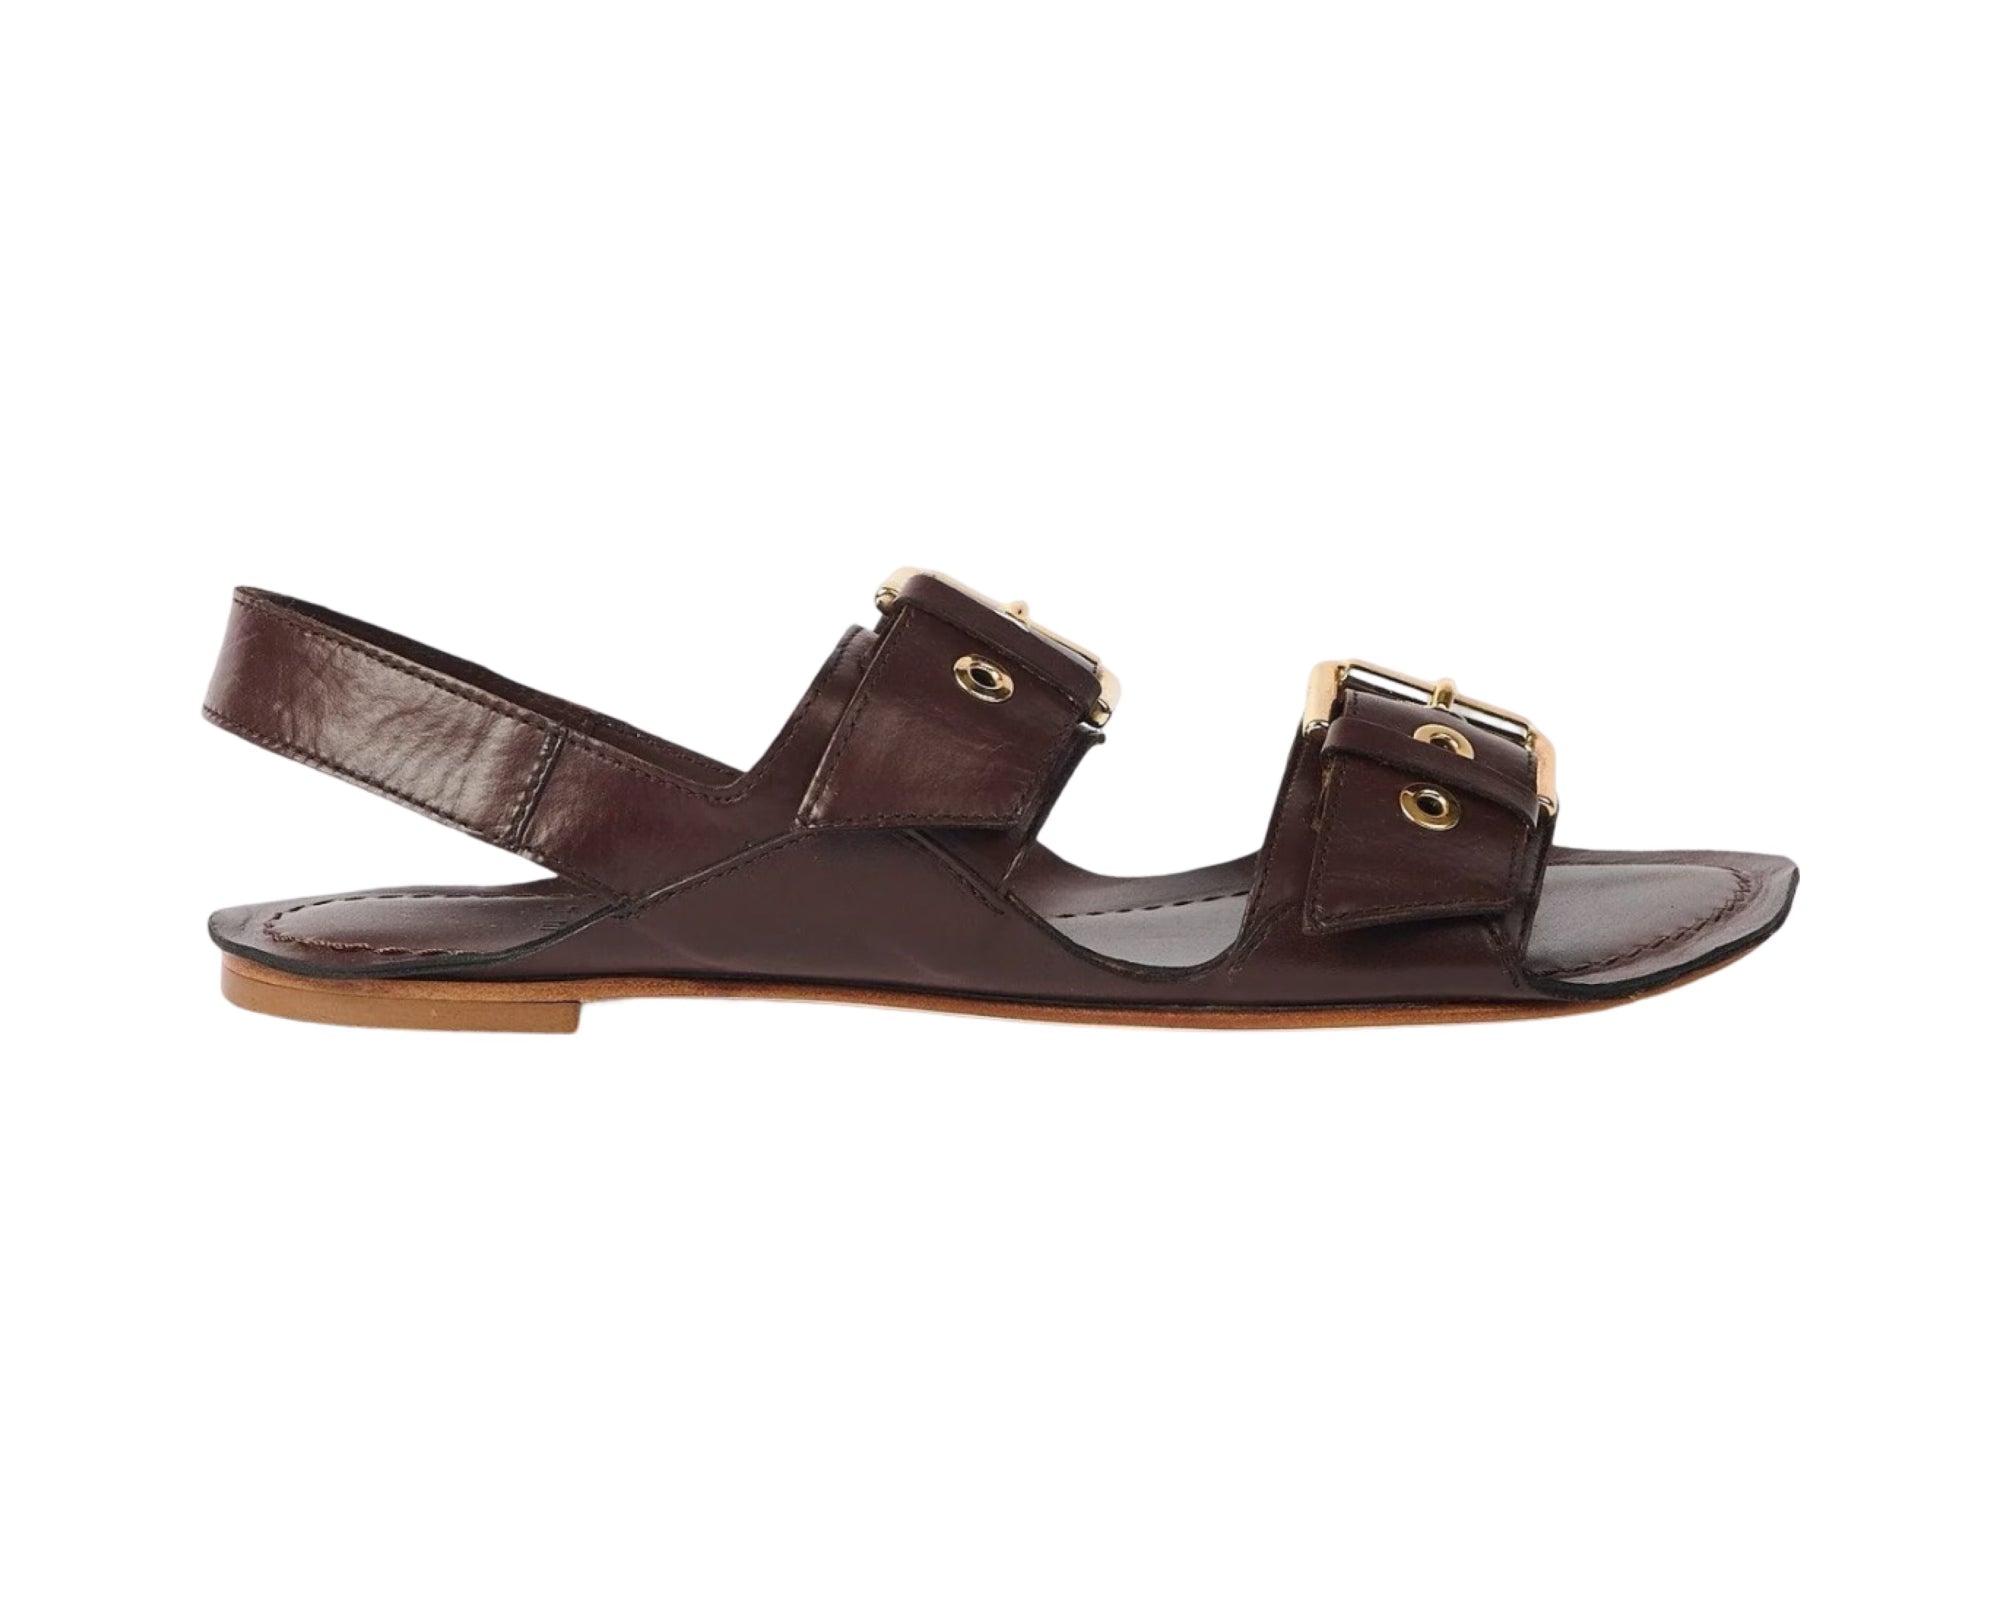 The Double Buckle Sandal in Castagno